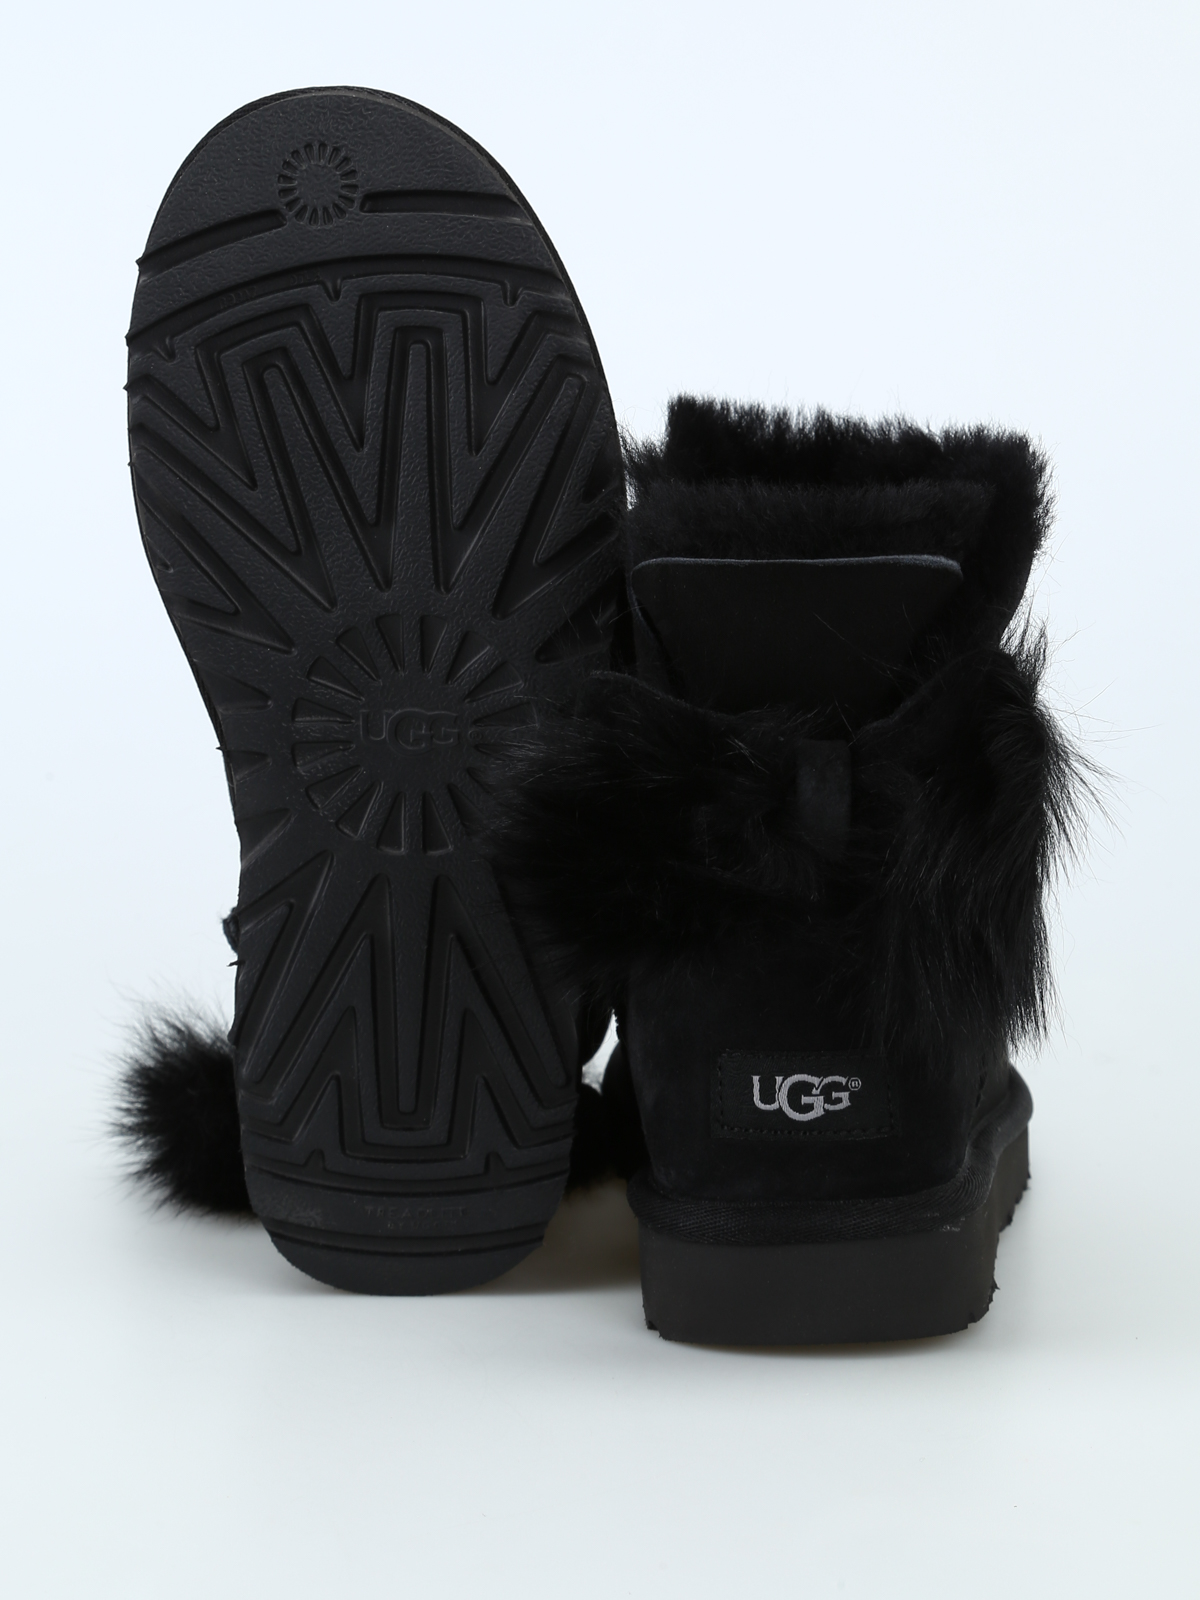 Ugg - Fluff Bow Mini black ankle boots 